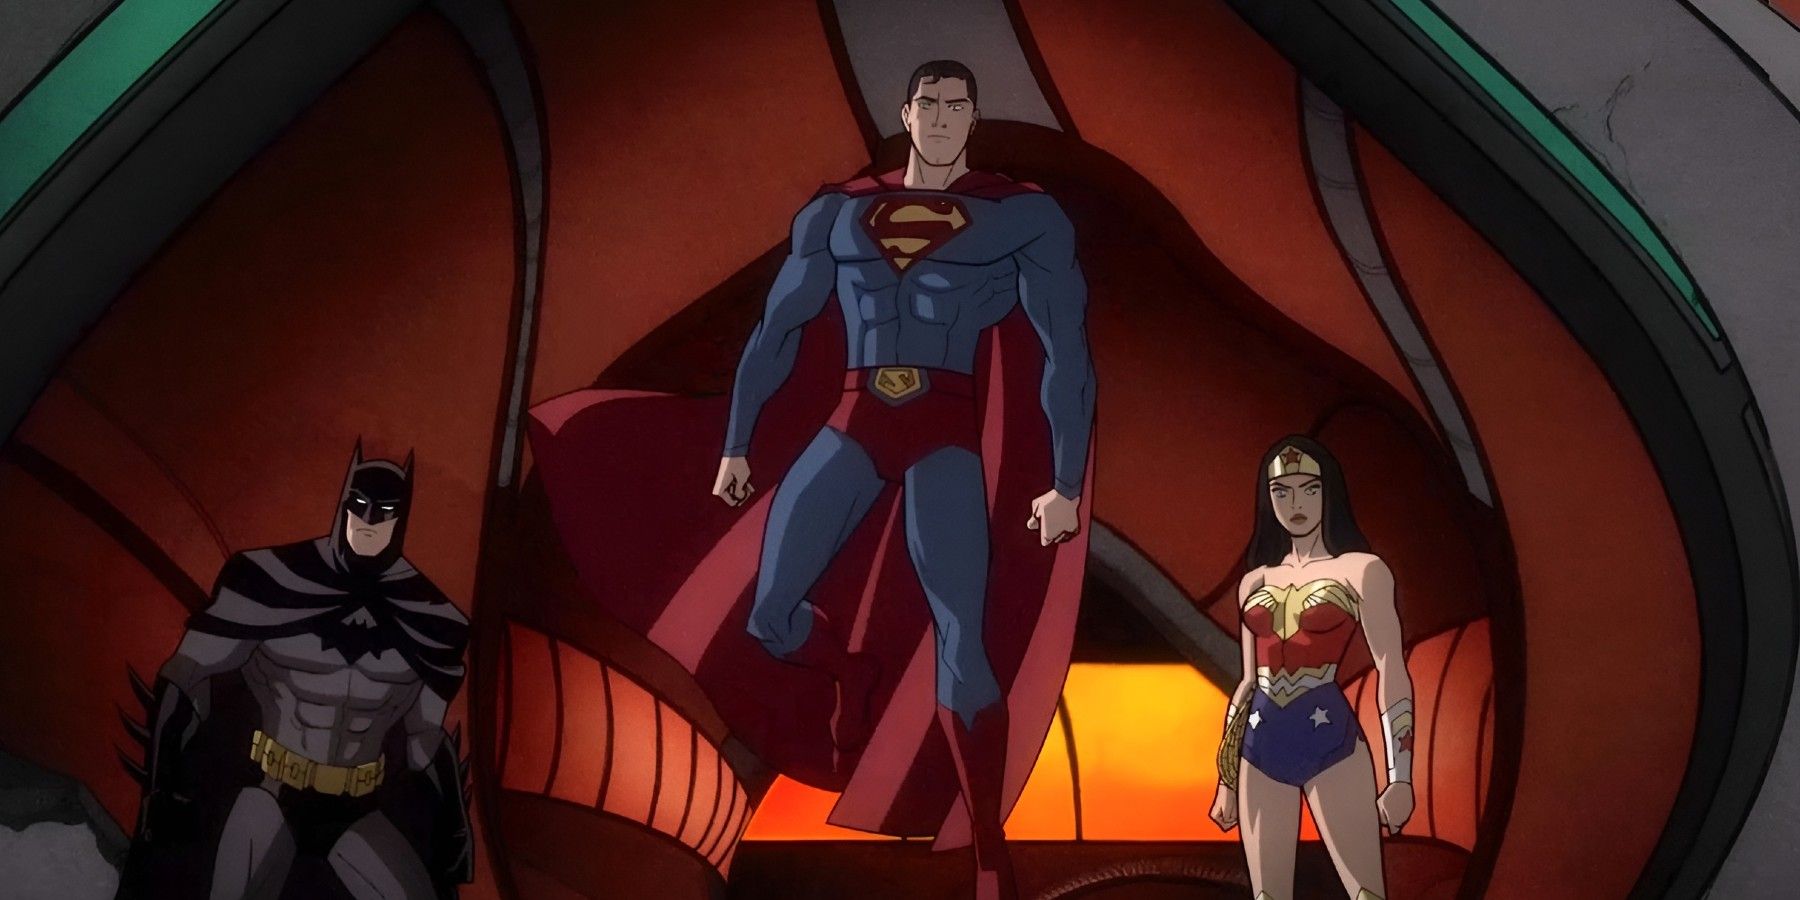 Batman, Superman and Wonder Woman in the animated Justice League: Warworld movie